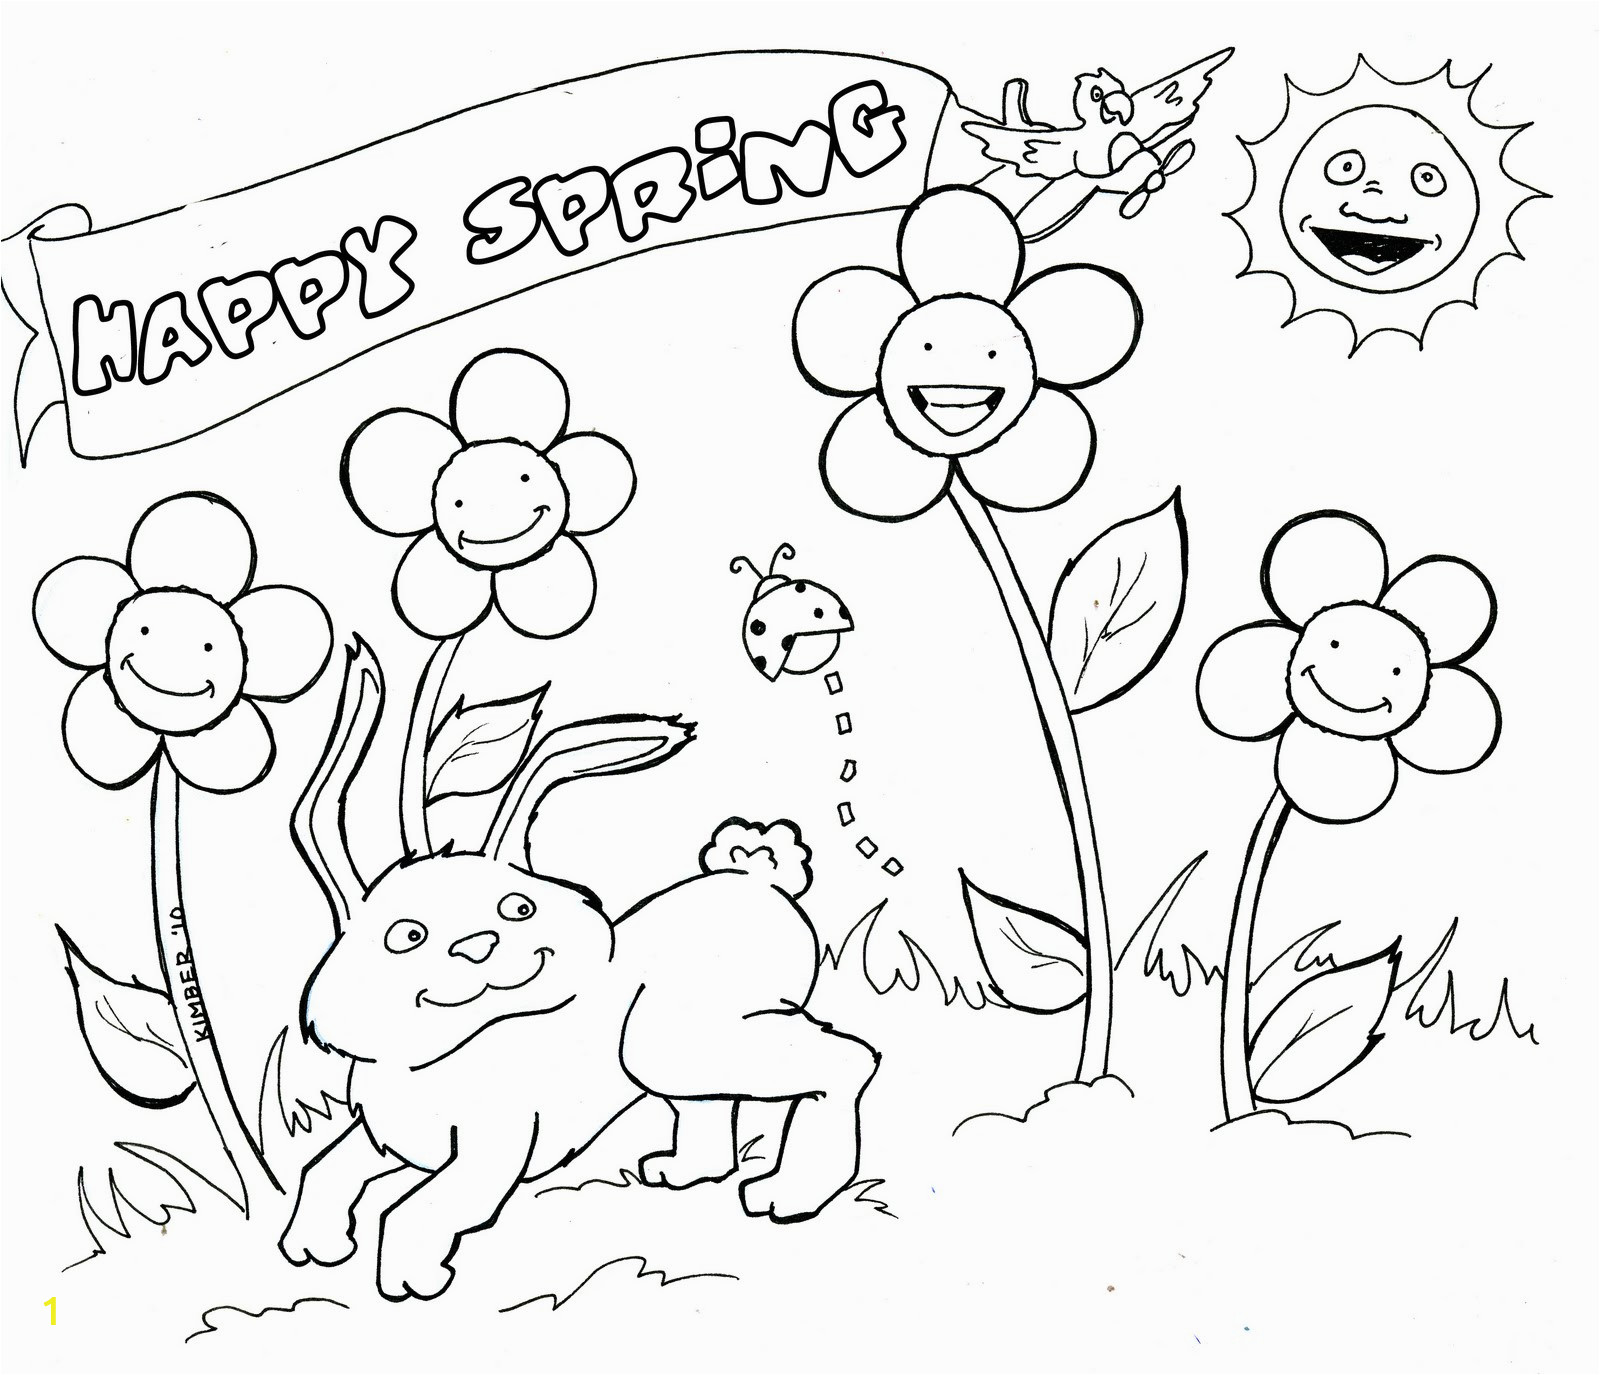 april shower animals coloring page pages to and print for free animal colouring games online best cat dinosaur king jam lion horse centipede printable my